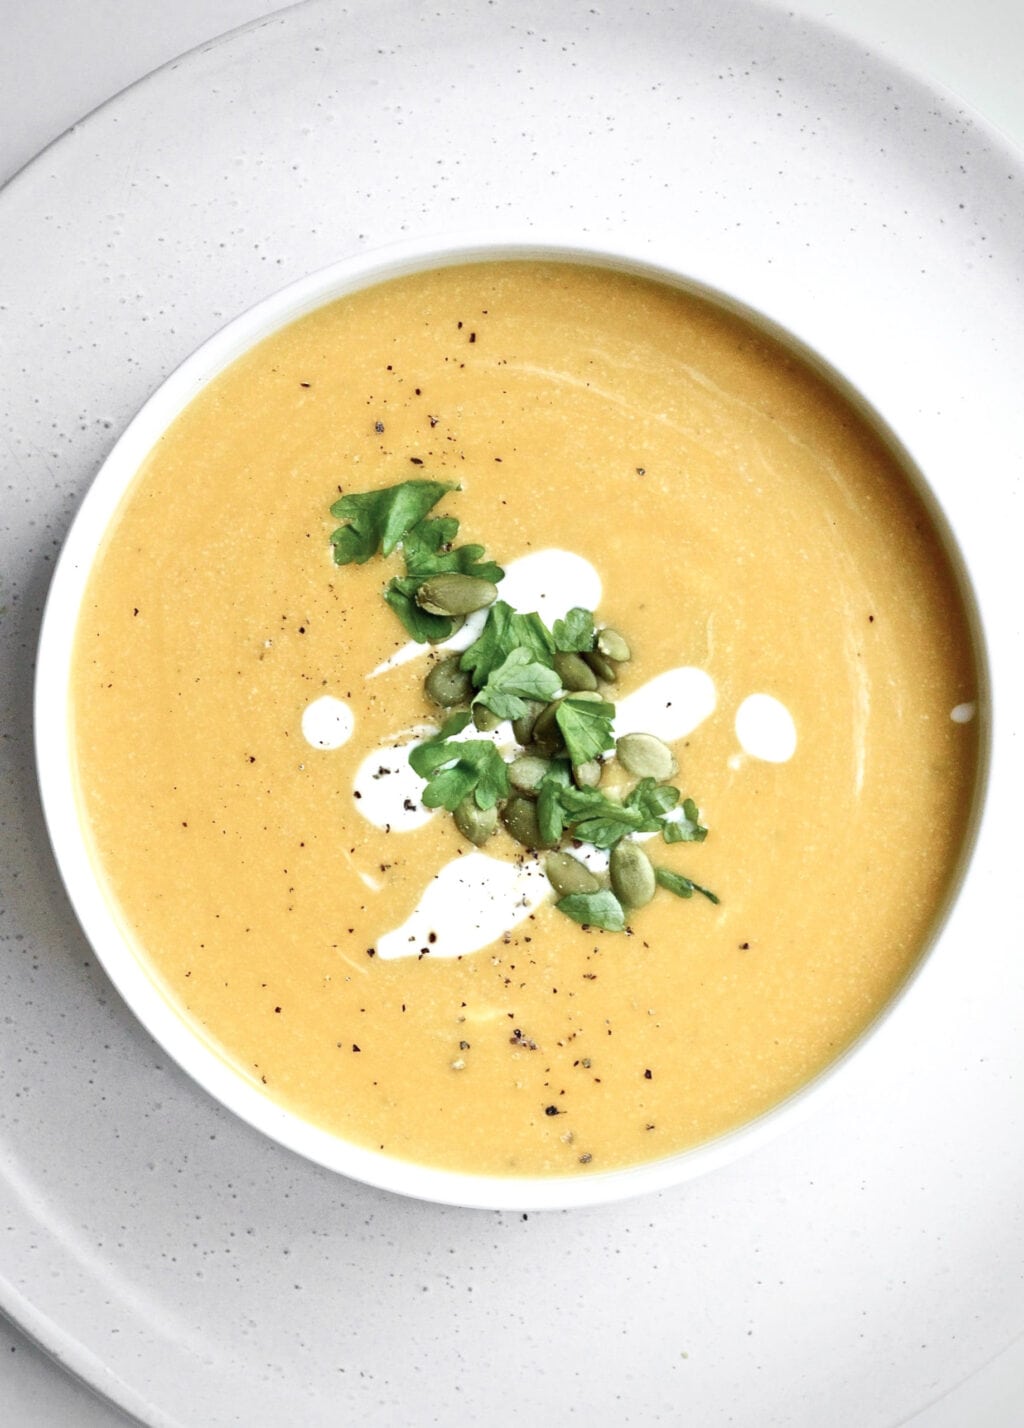 A birds-eye photo of pumpkin soup garnished with pumpkin seeds and Italian flat leaf parsley, with a tasteful drizzle of cashew cream.